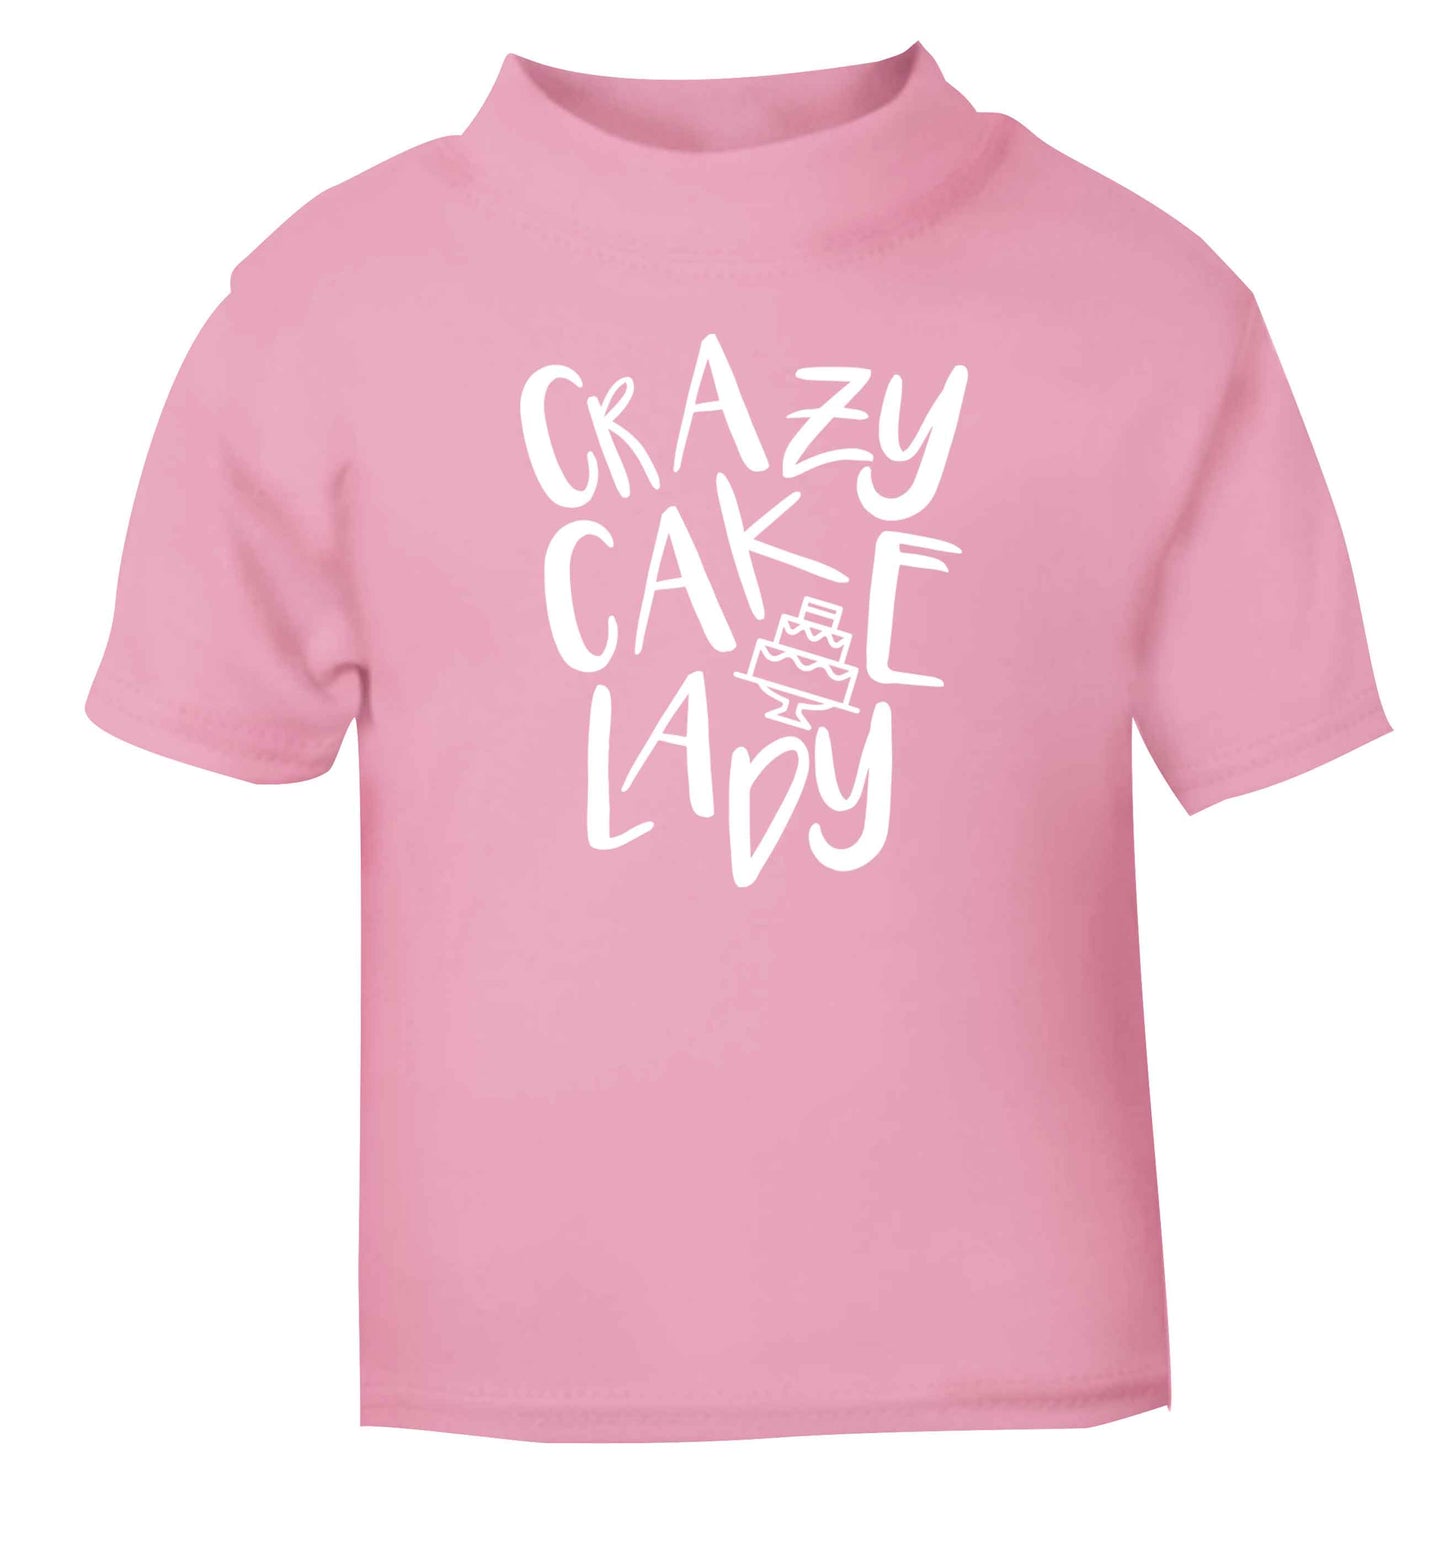 Crazy cake lady light pink Baby Toddler Tshirt 2 Years